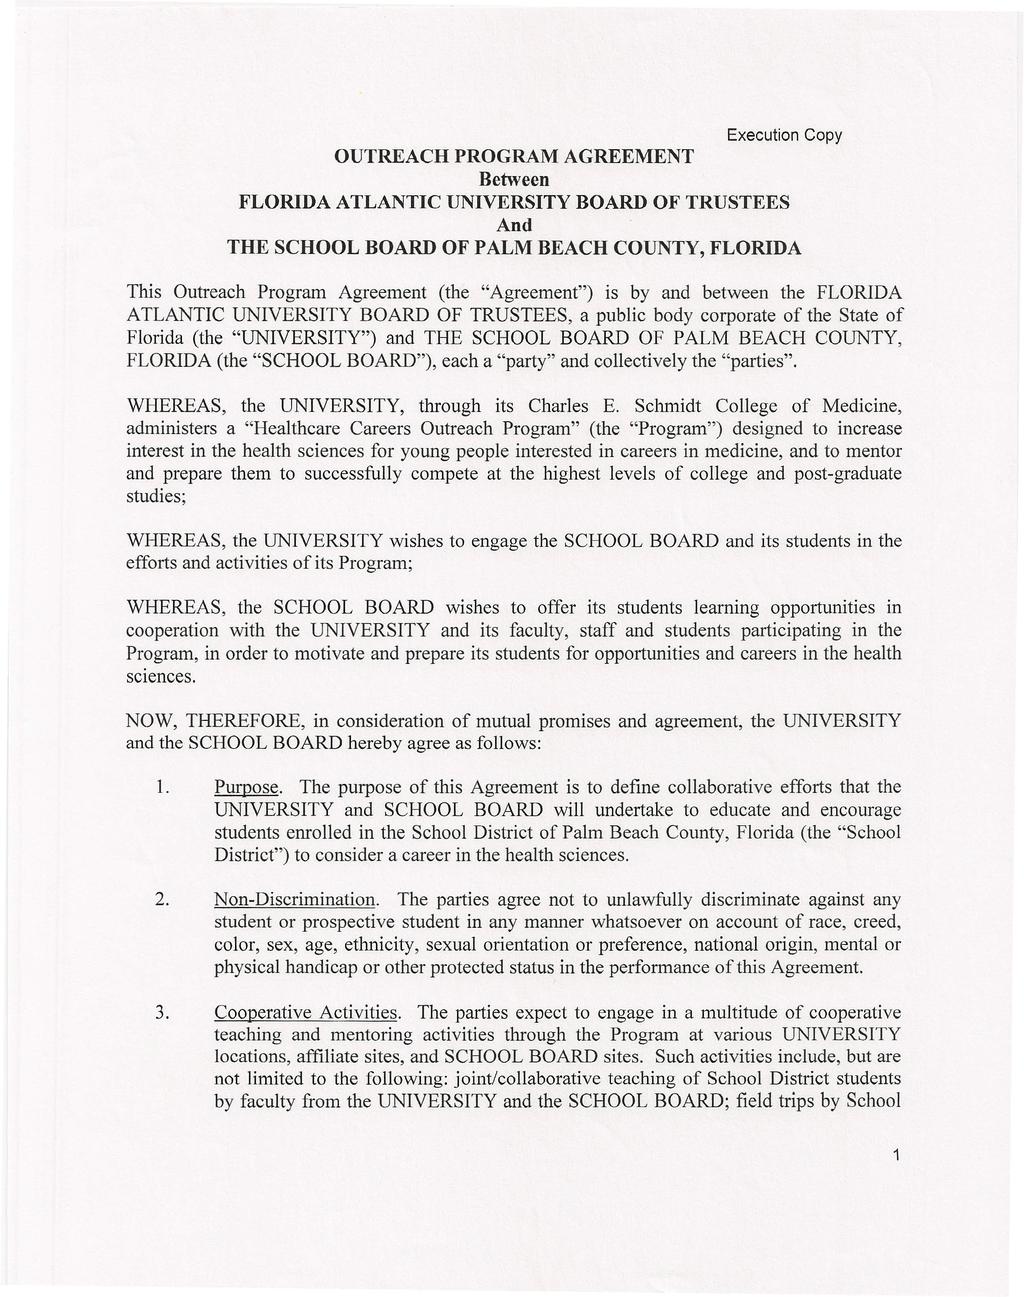 Execution OUTREACH PROGRAM AGREEMENT Between FLORIDA ATLANTIC UNIVERSITY BOARD OF TRUSTEES And THE SCHOOL BOARD OF PALM BEACH COUNTY, FLORIDA Copy This Outreach Program Agreement (the "Agreement") is